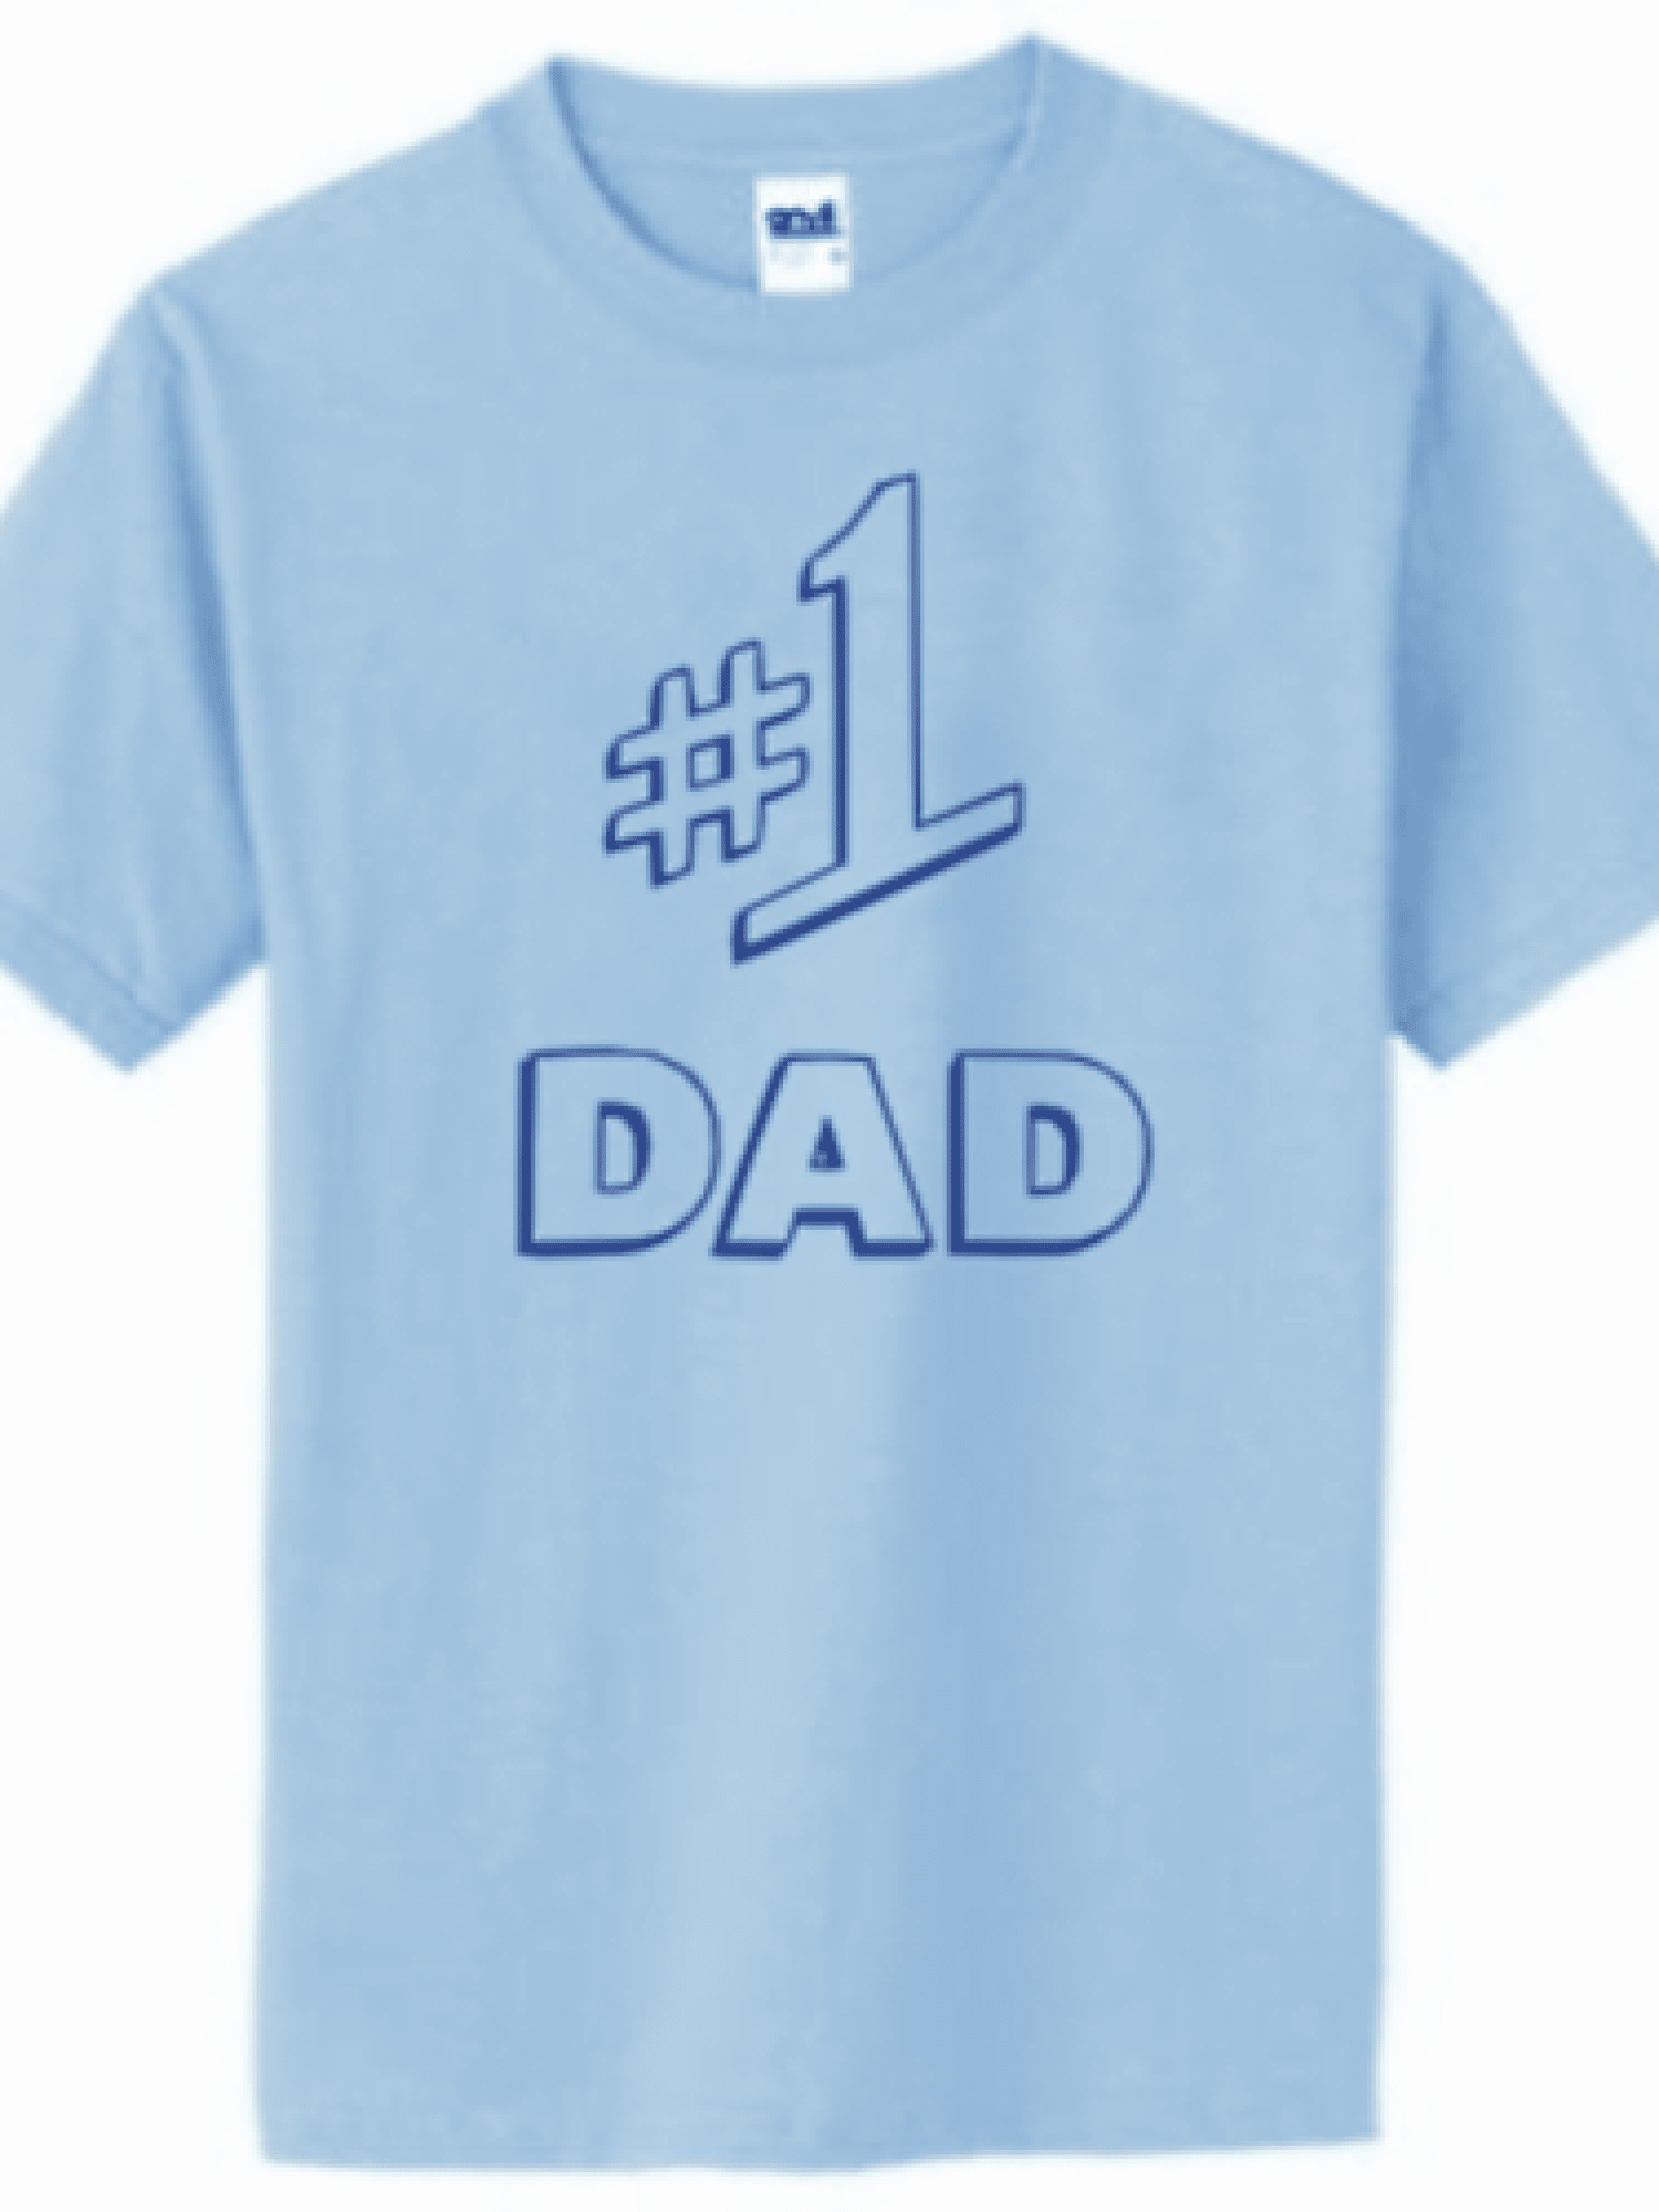 #1 DAD Jerry SEINFELD Great Gift Dad Daddy Father's Day Men's Tee Shirt 293